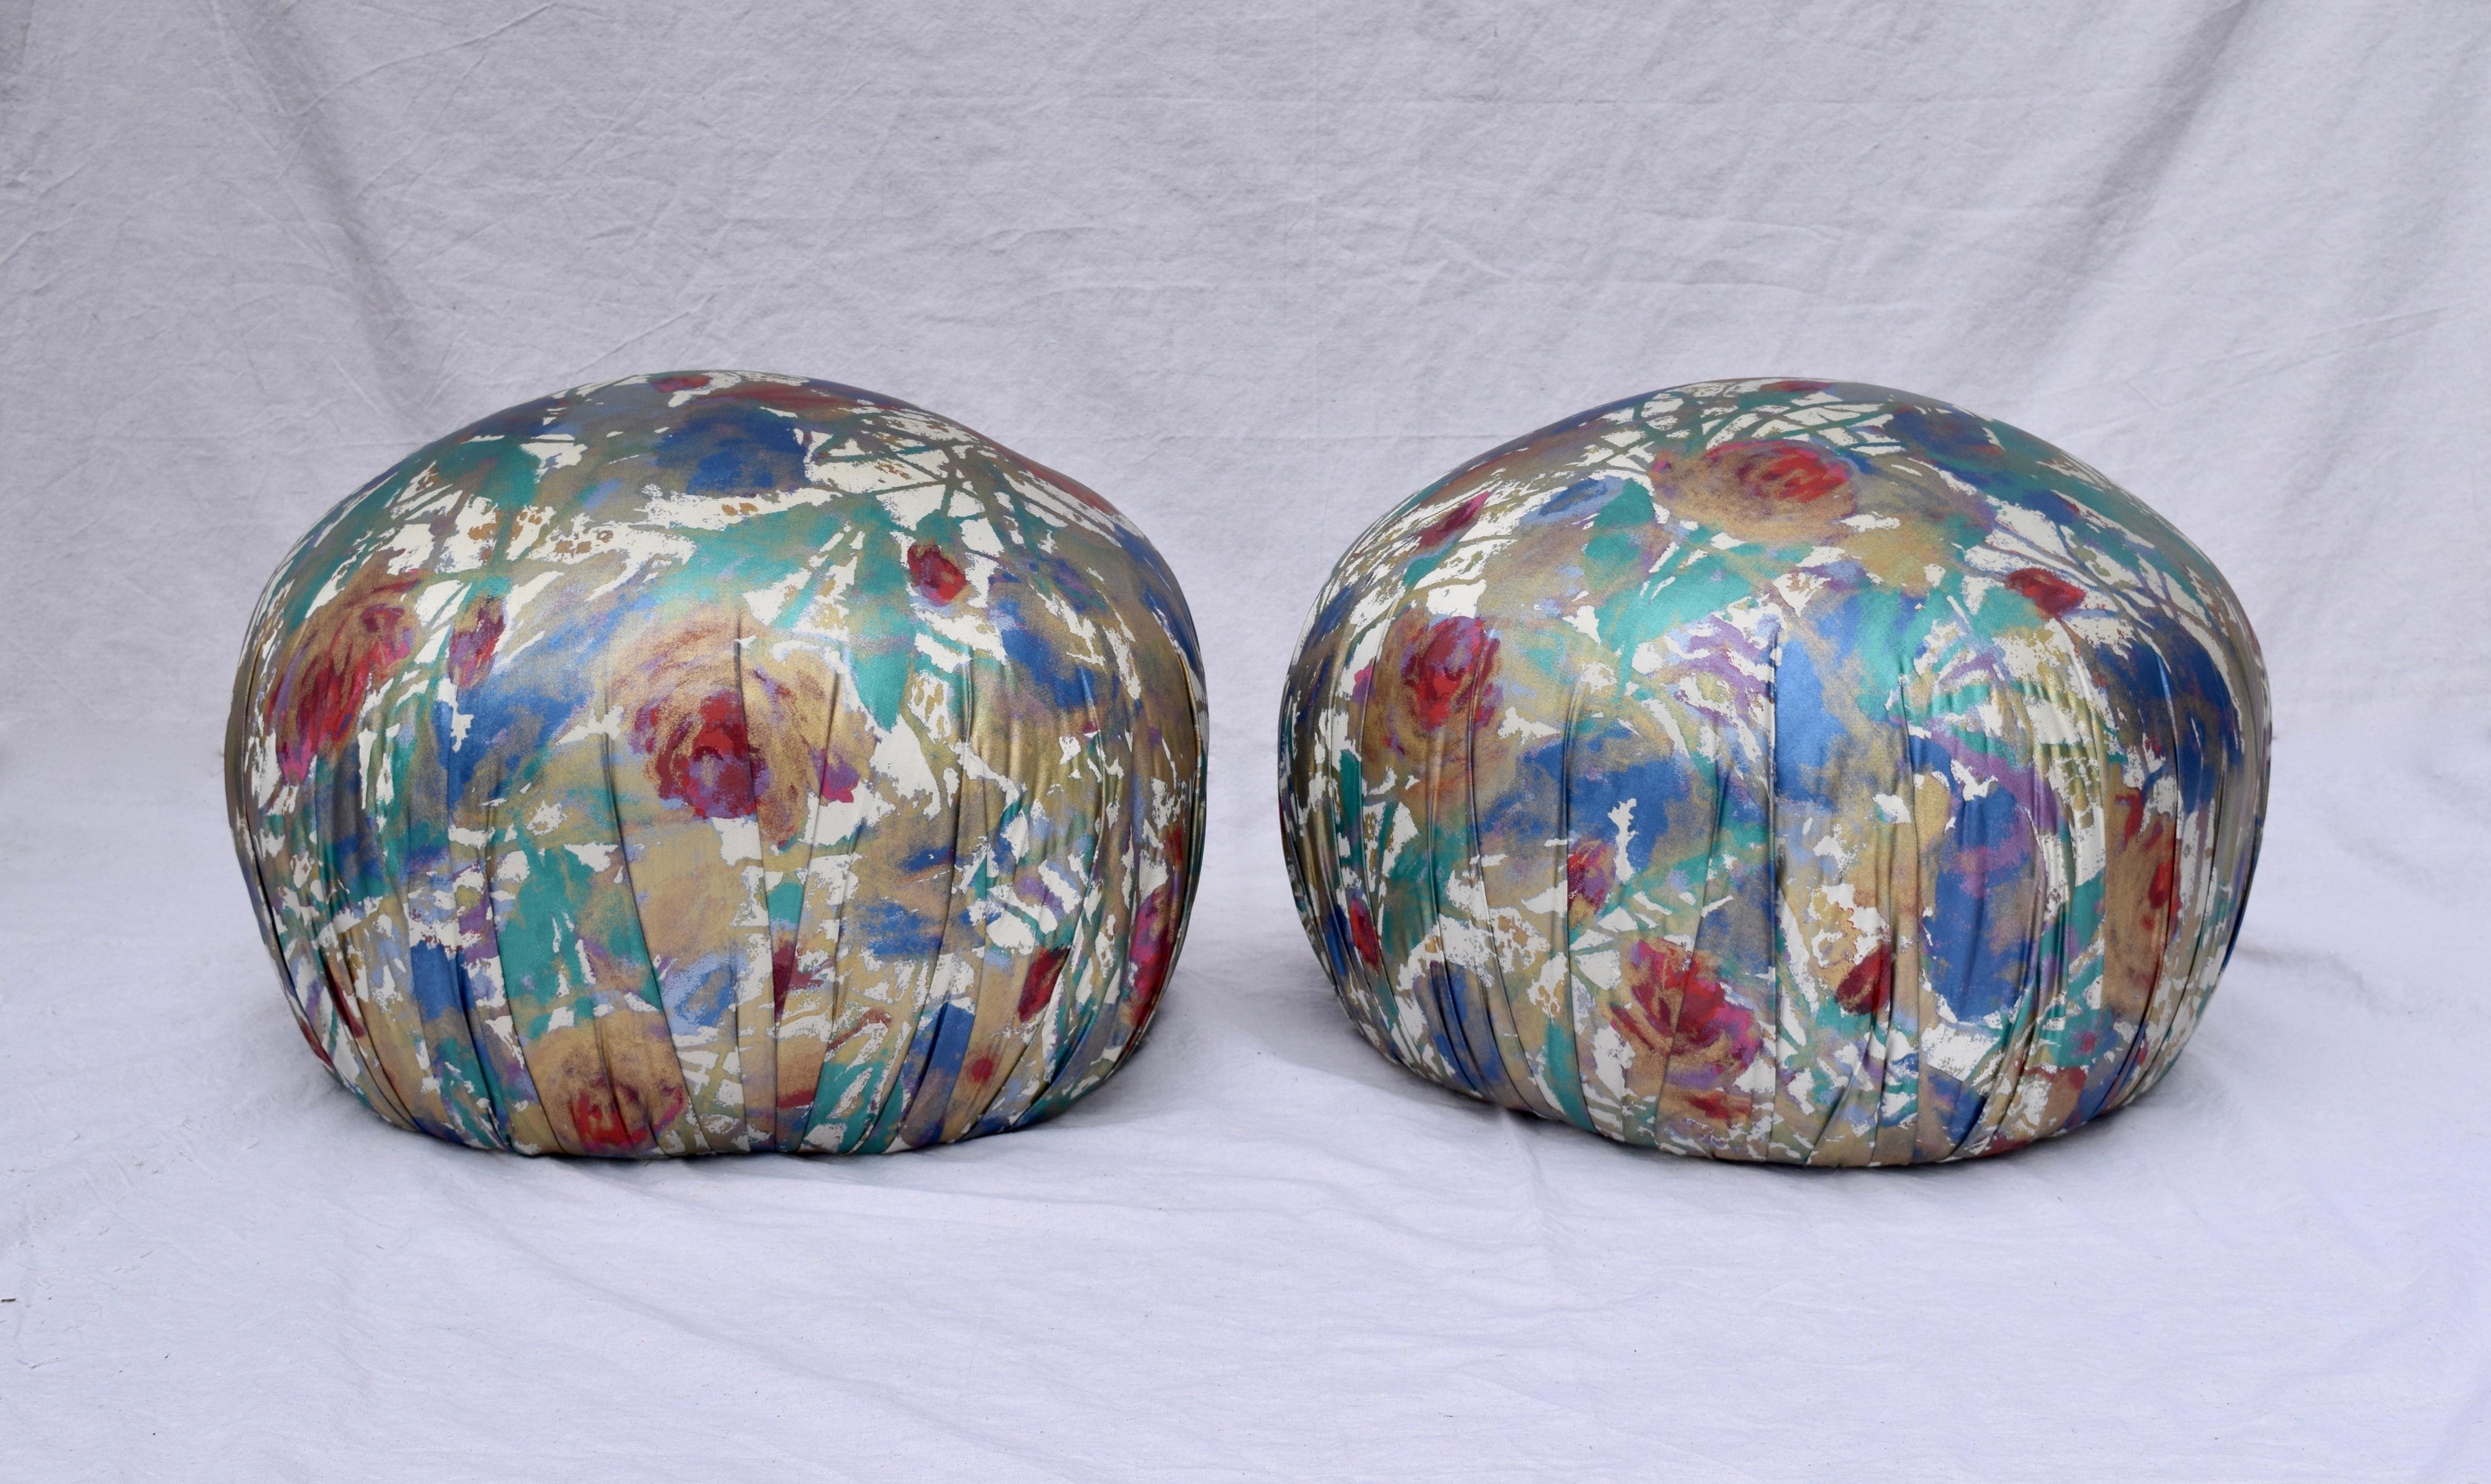 An exceptional pair of generously sized pouf ottomans designed by Directional. As if frozen in time, striking original shimmering hand painted fabric has been covered since the time of purchase in the early 1980s. Original Directional tags are